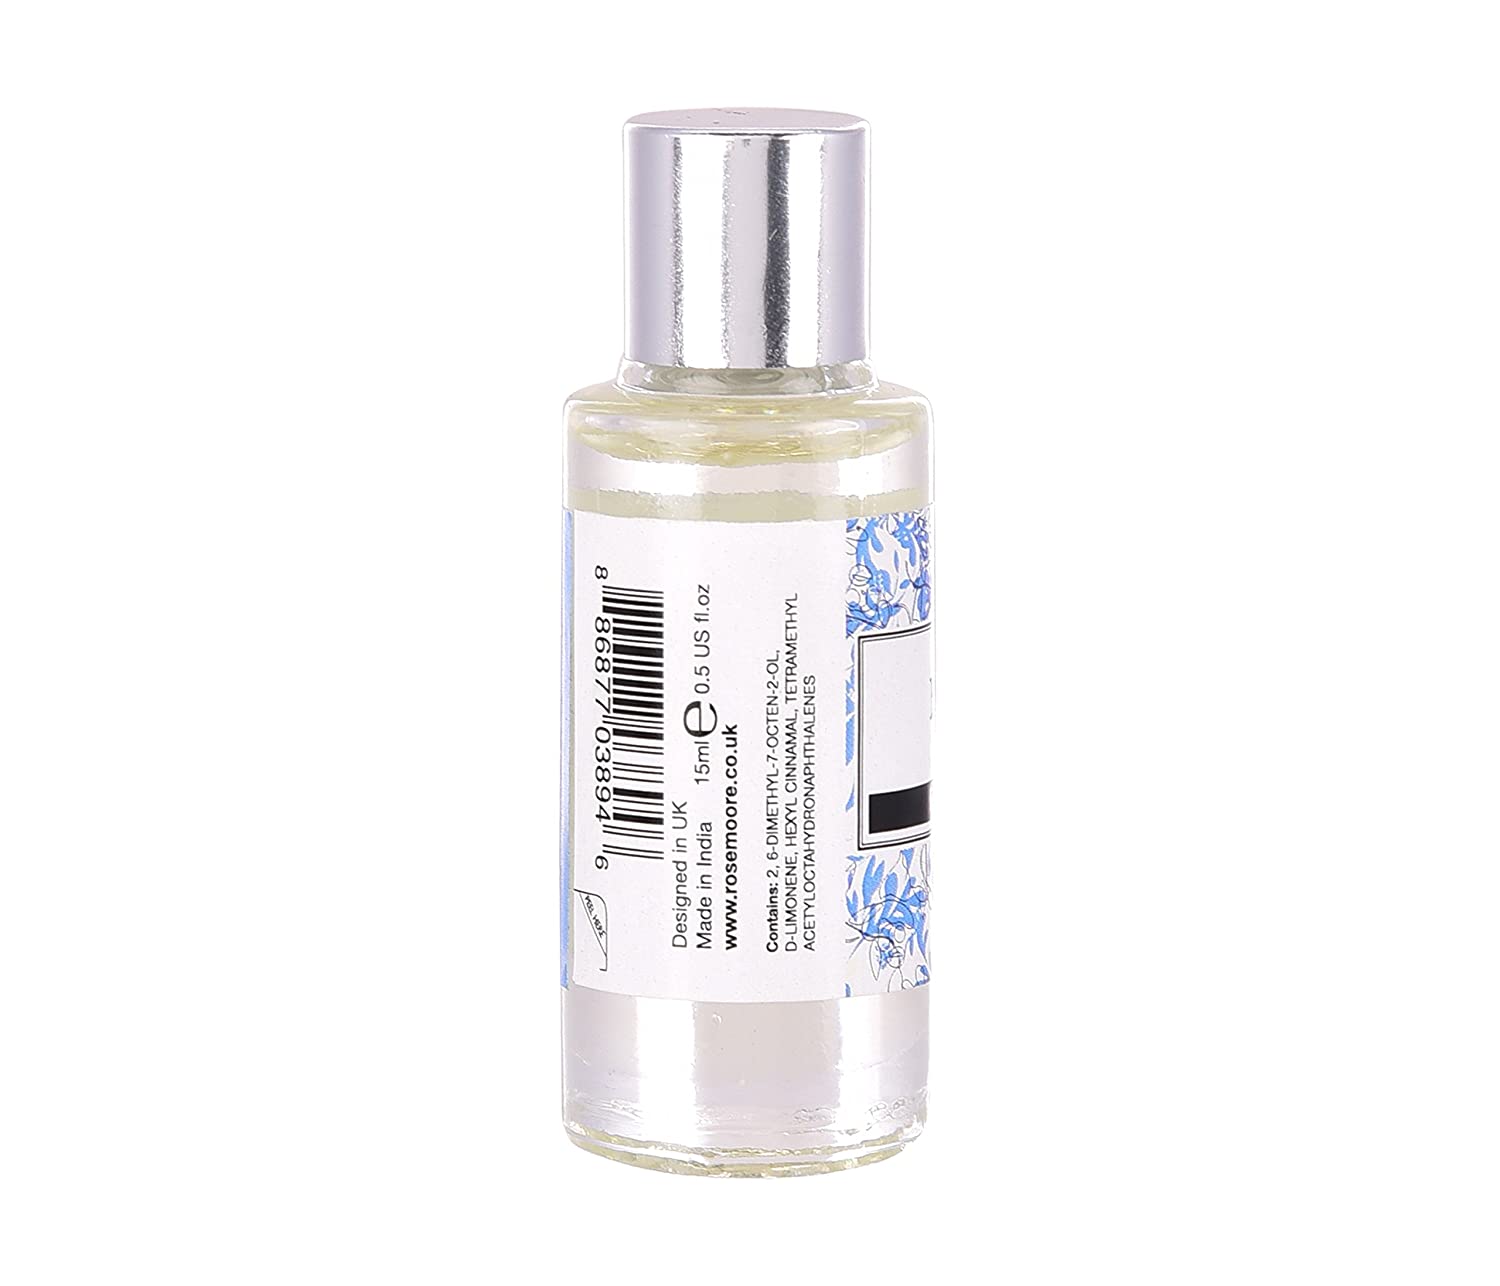 Scented Home Fragrance Oil Blue Oud